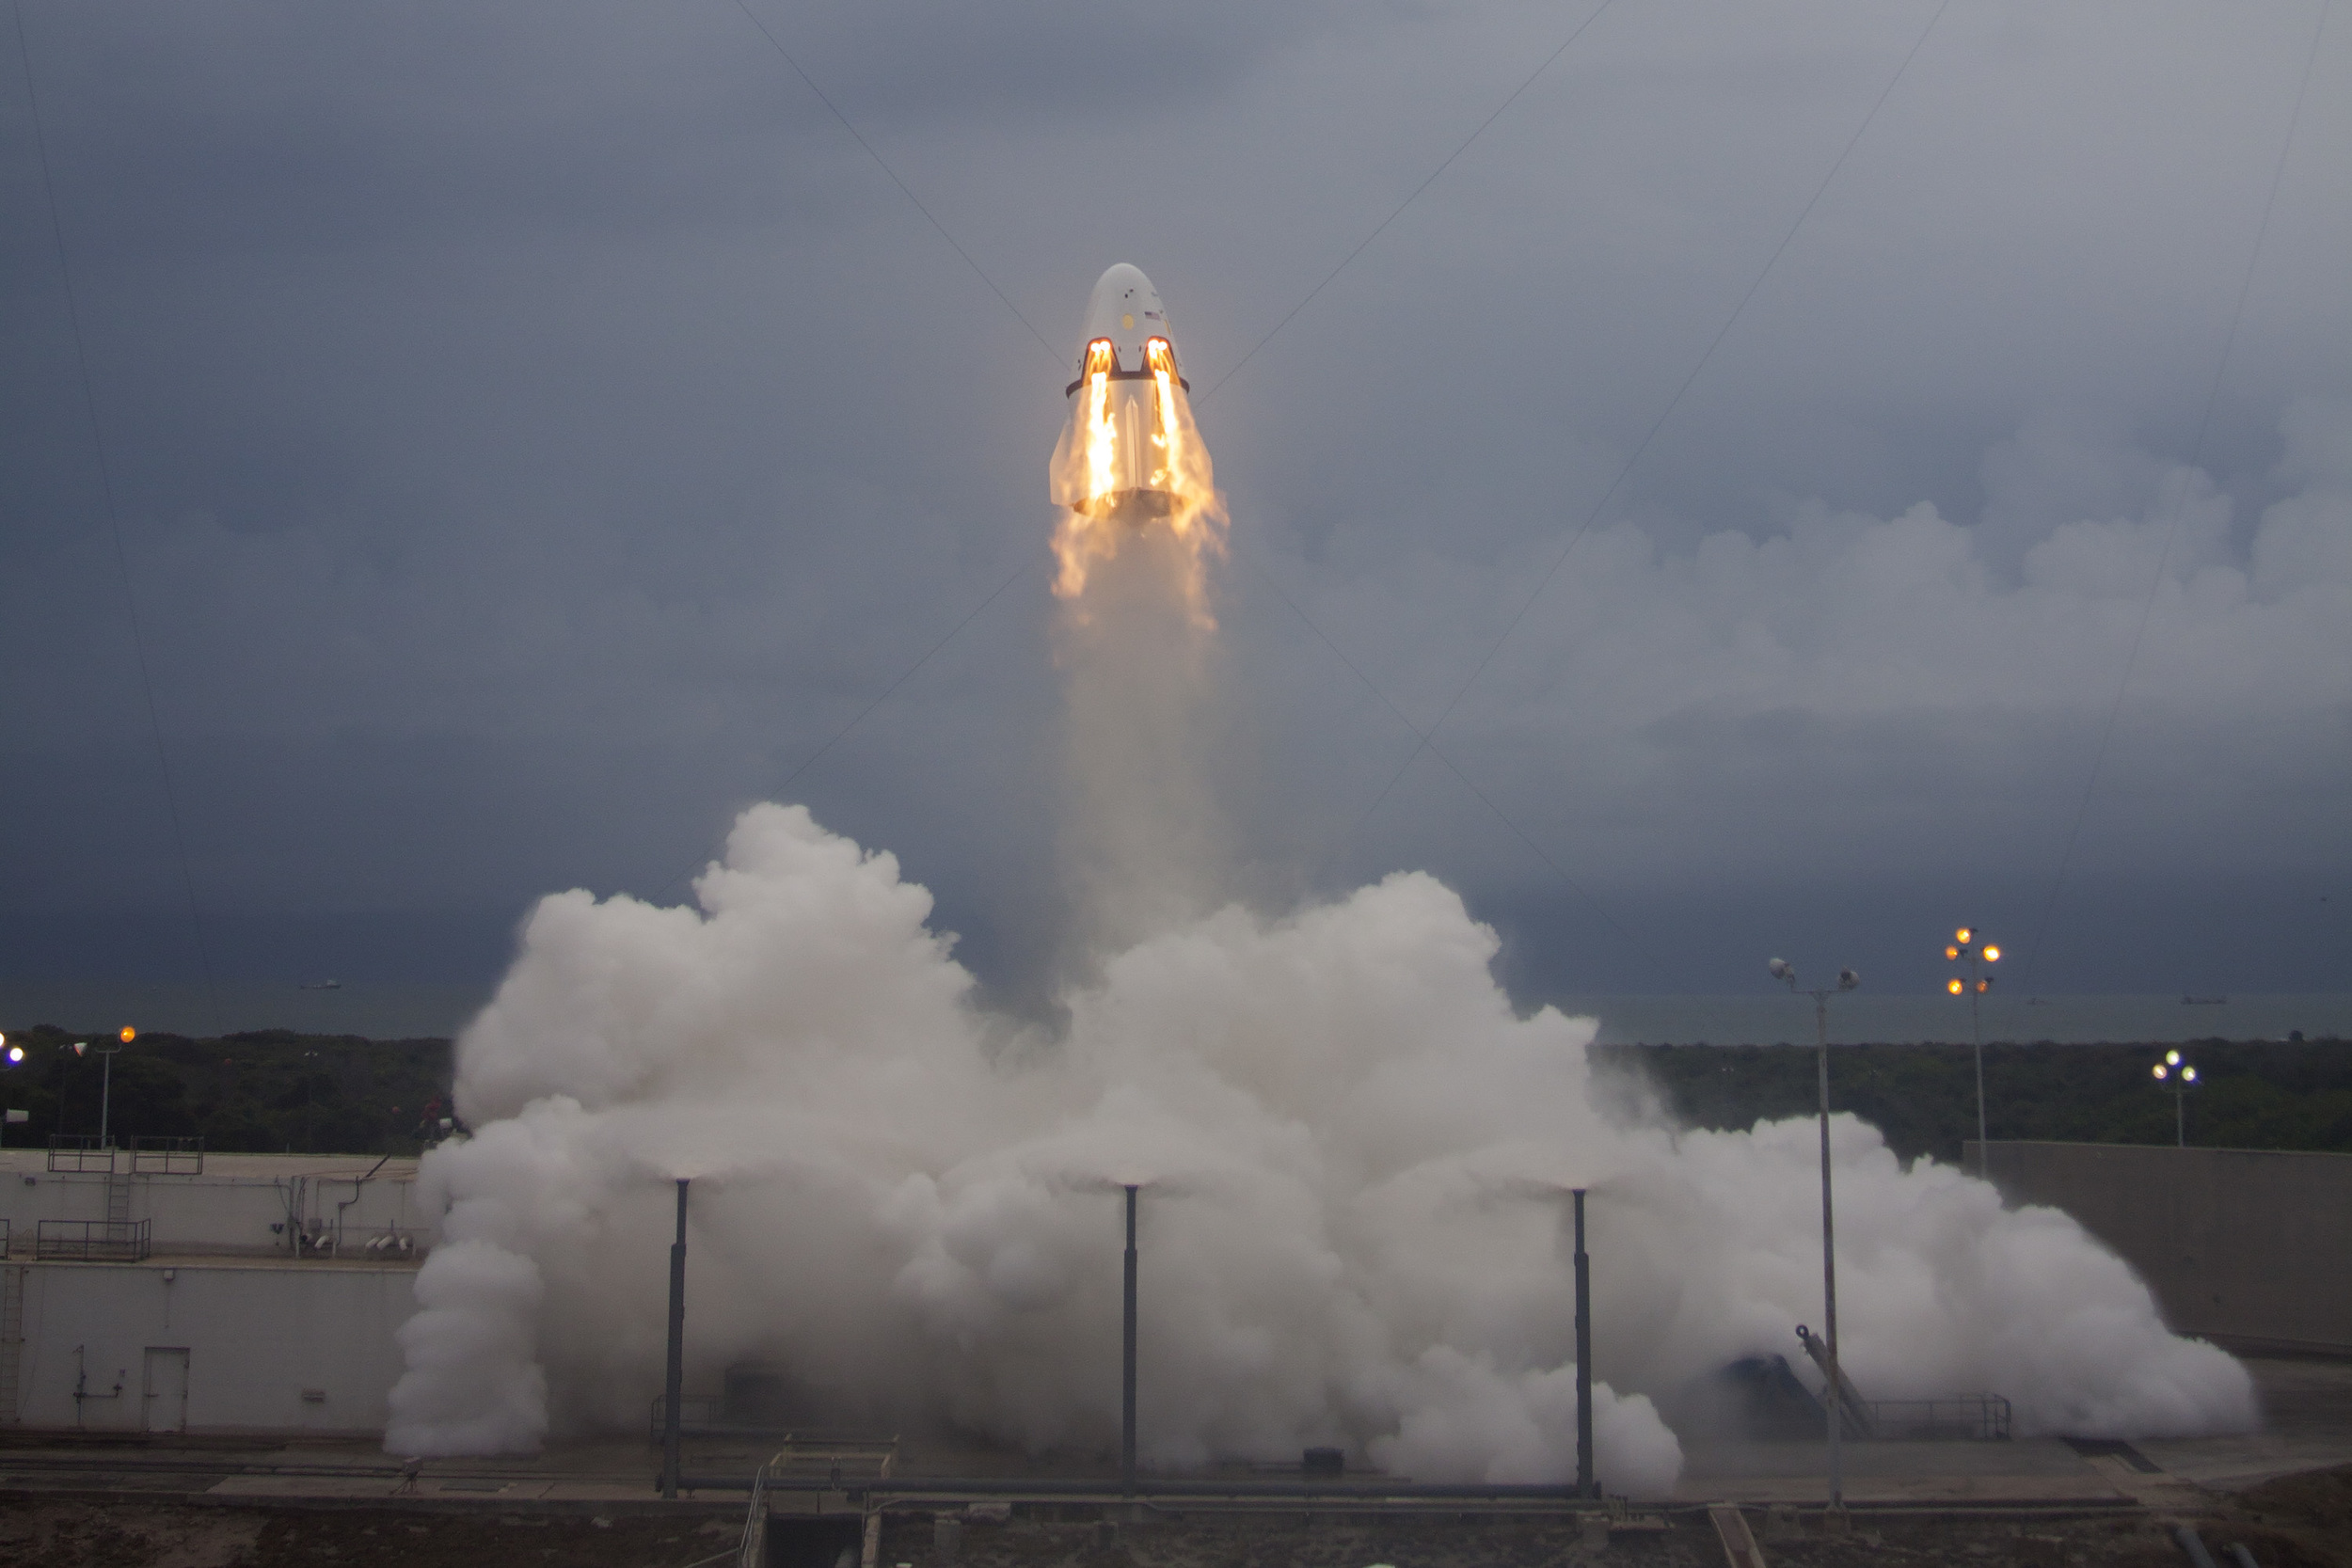  Crew Dragon flies skyward, testing the SuperDraco thrusters in the Pad Abort test on May 6, 2015. Photo Credit: SpaceX 